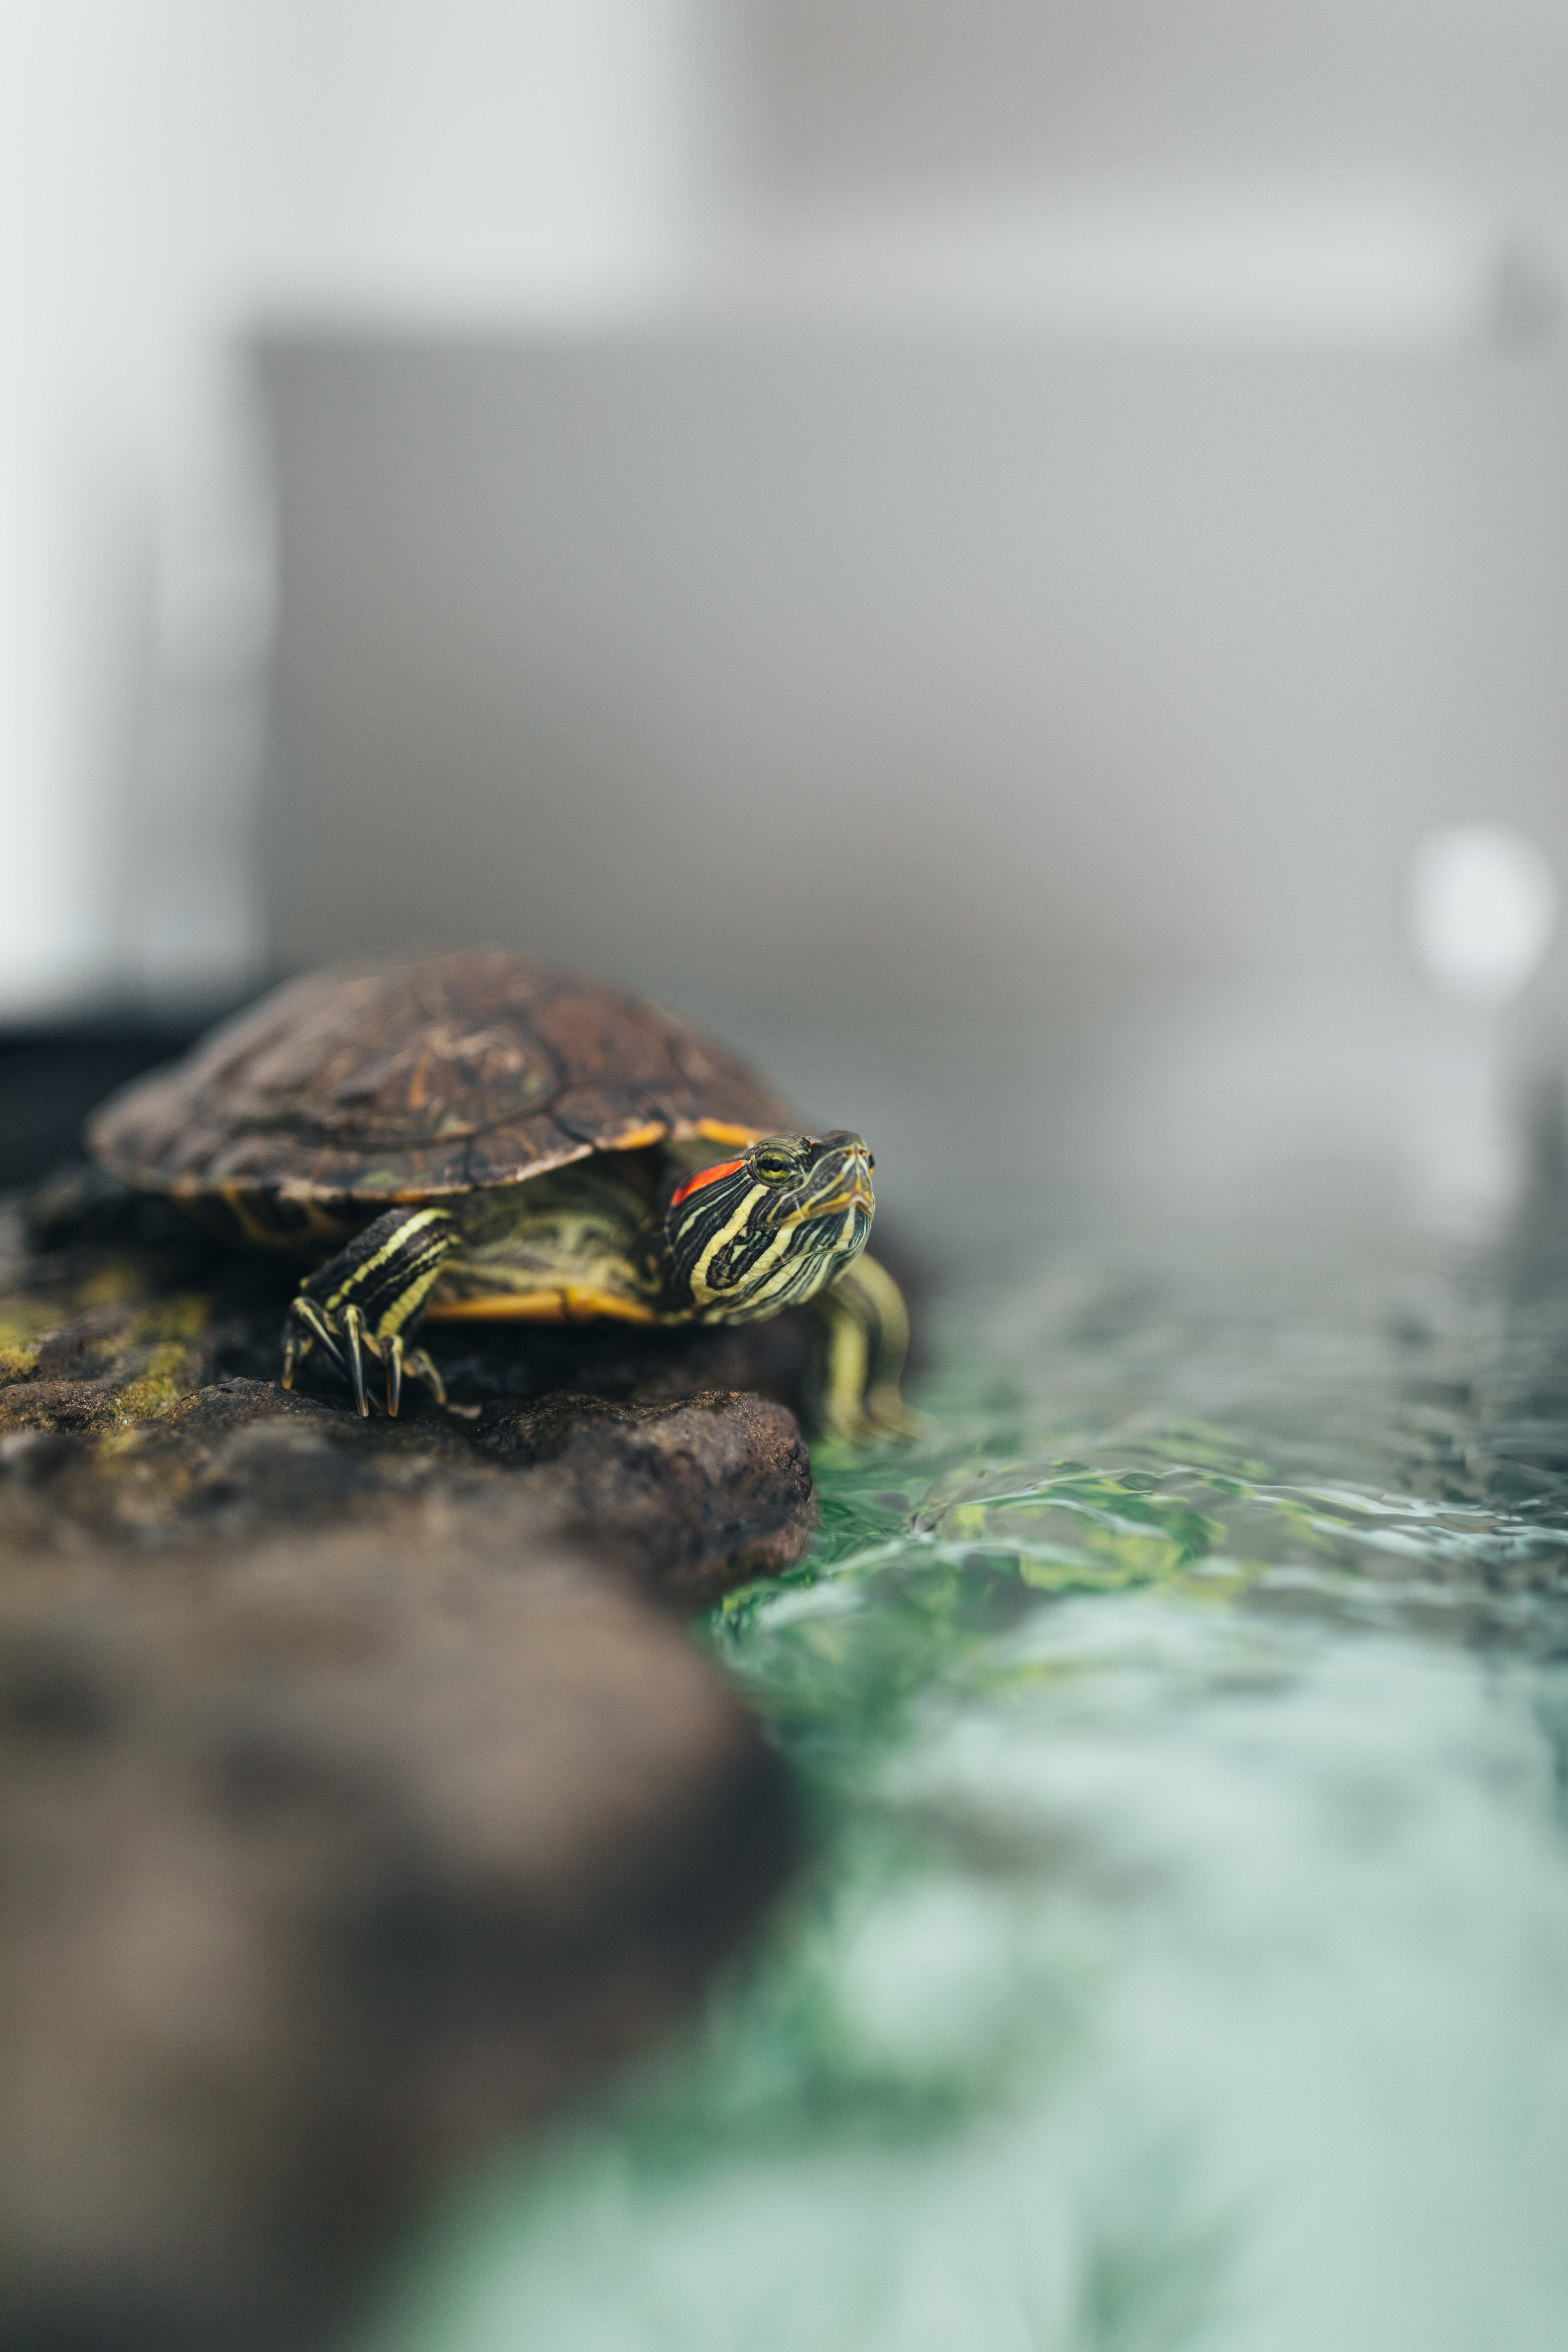 100839 download wallpaper animals, water, animal, carapace, shell, turtle screensavers and pictures for free